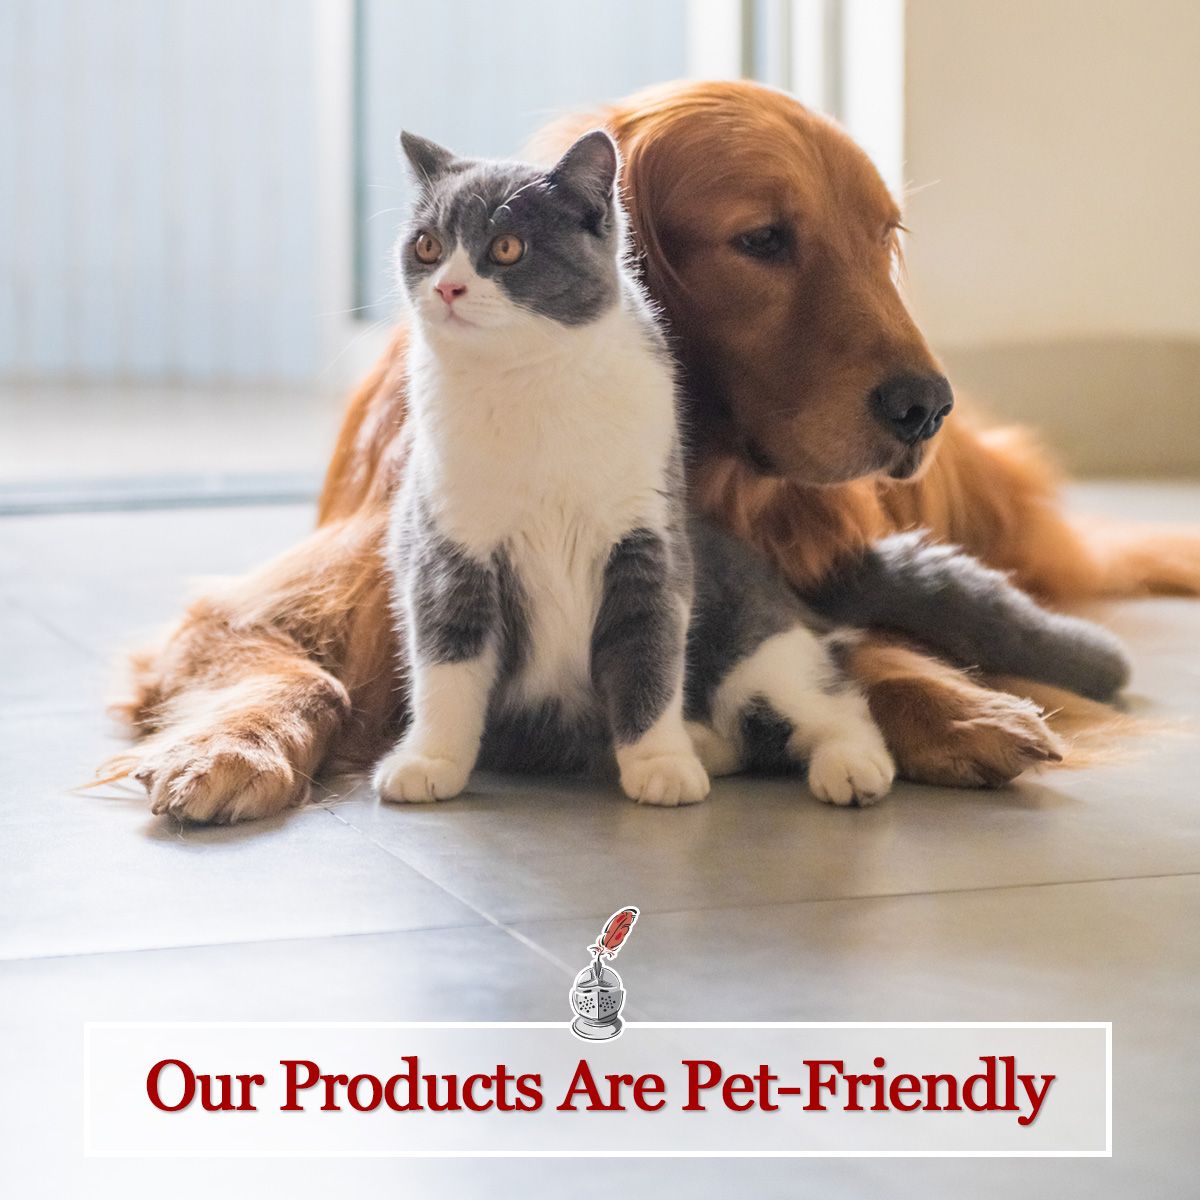 Our Products Are Pet-Friendly